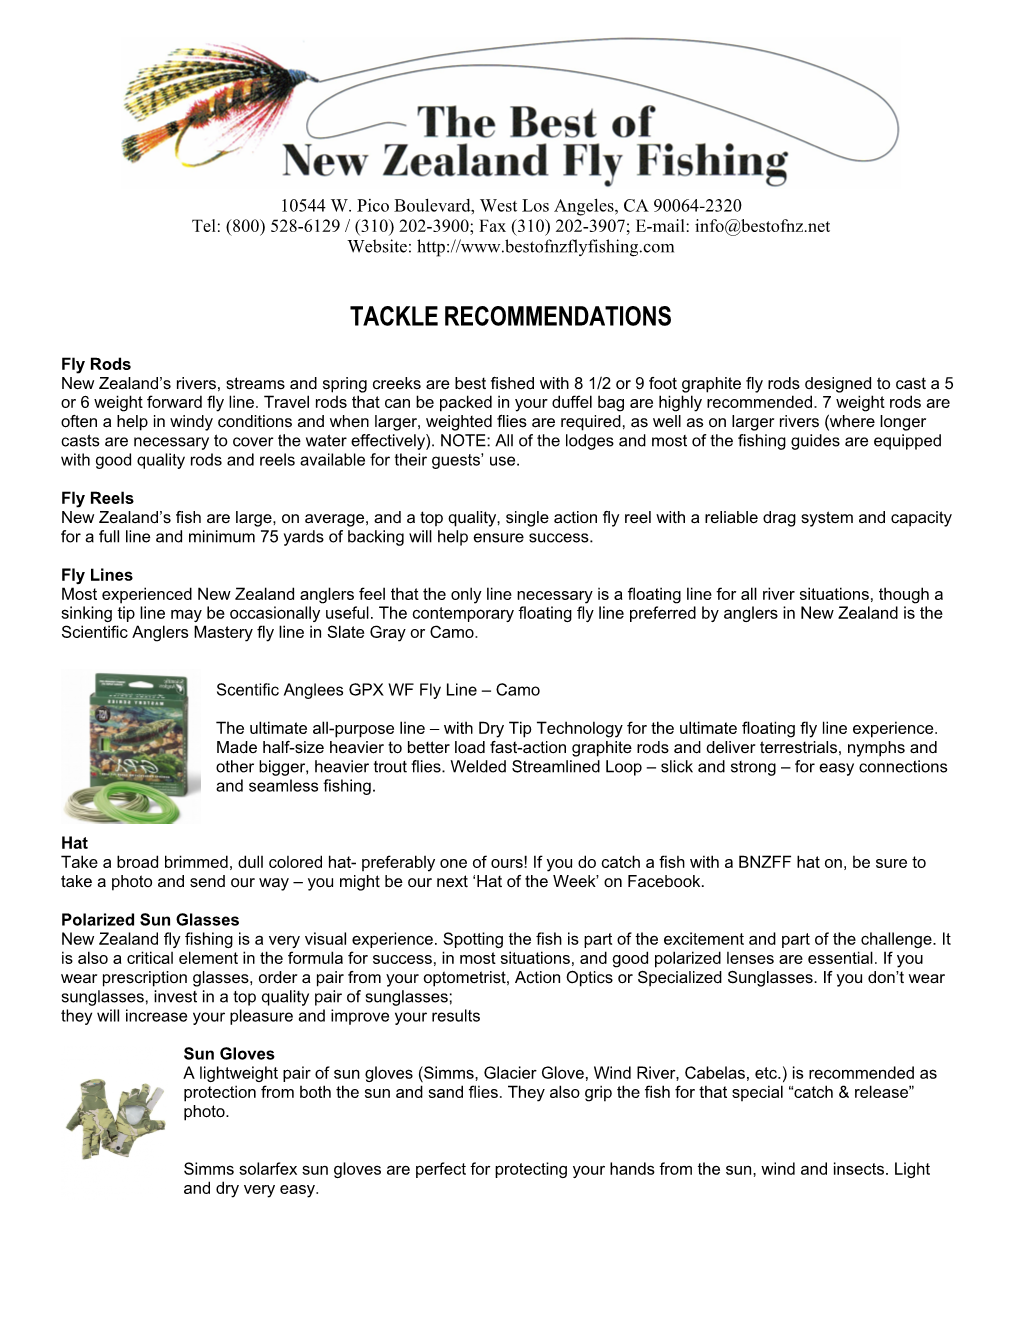 Tackle Recommendations